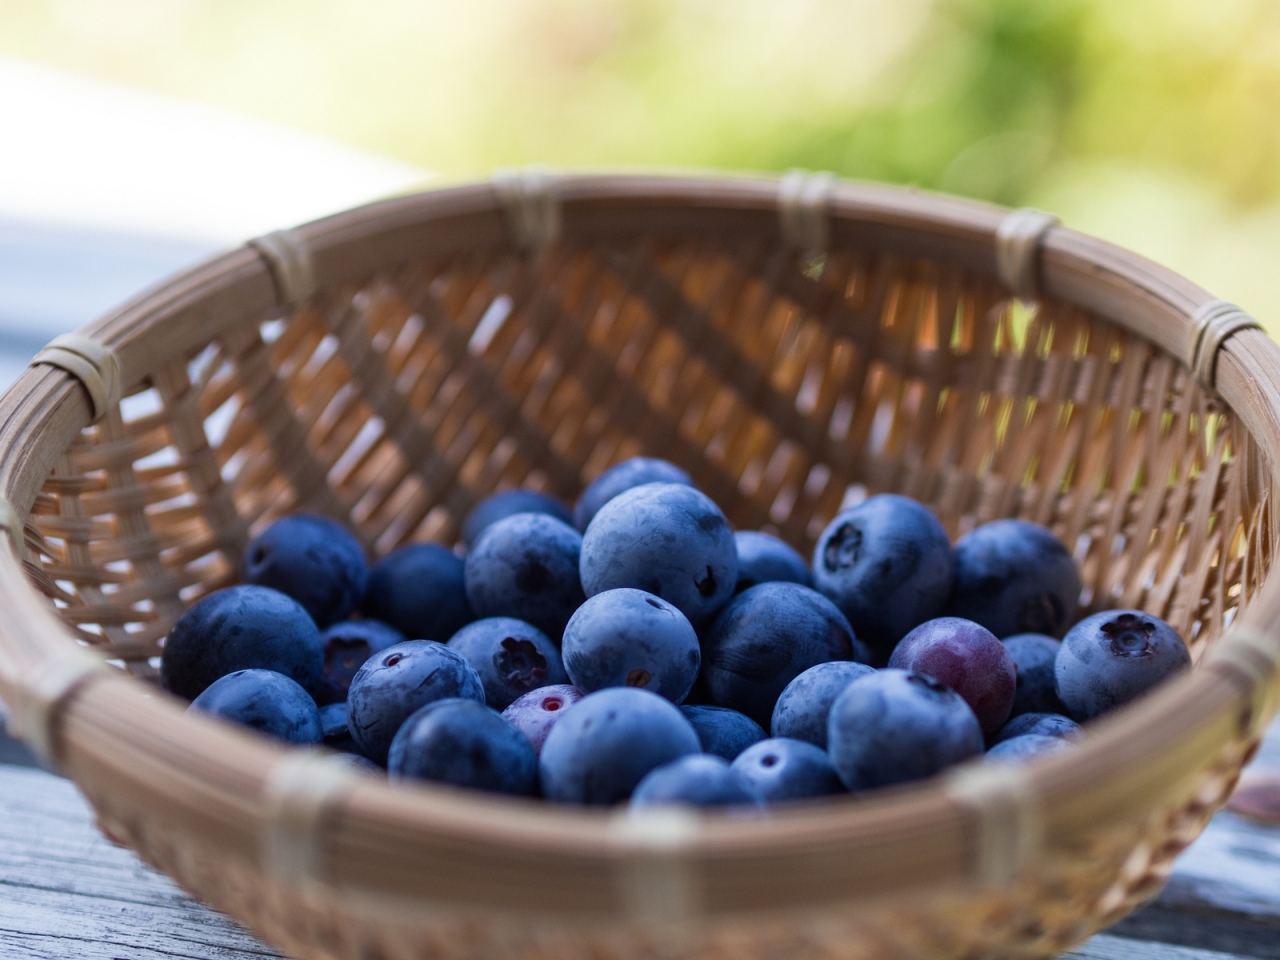 Basket of Blueberries for 1280 x 960 resolution